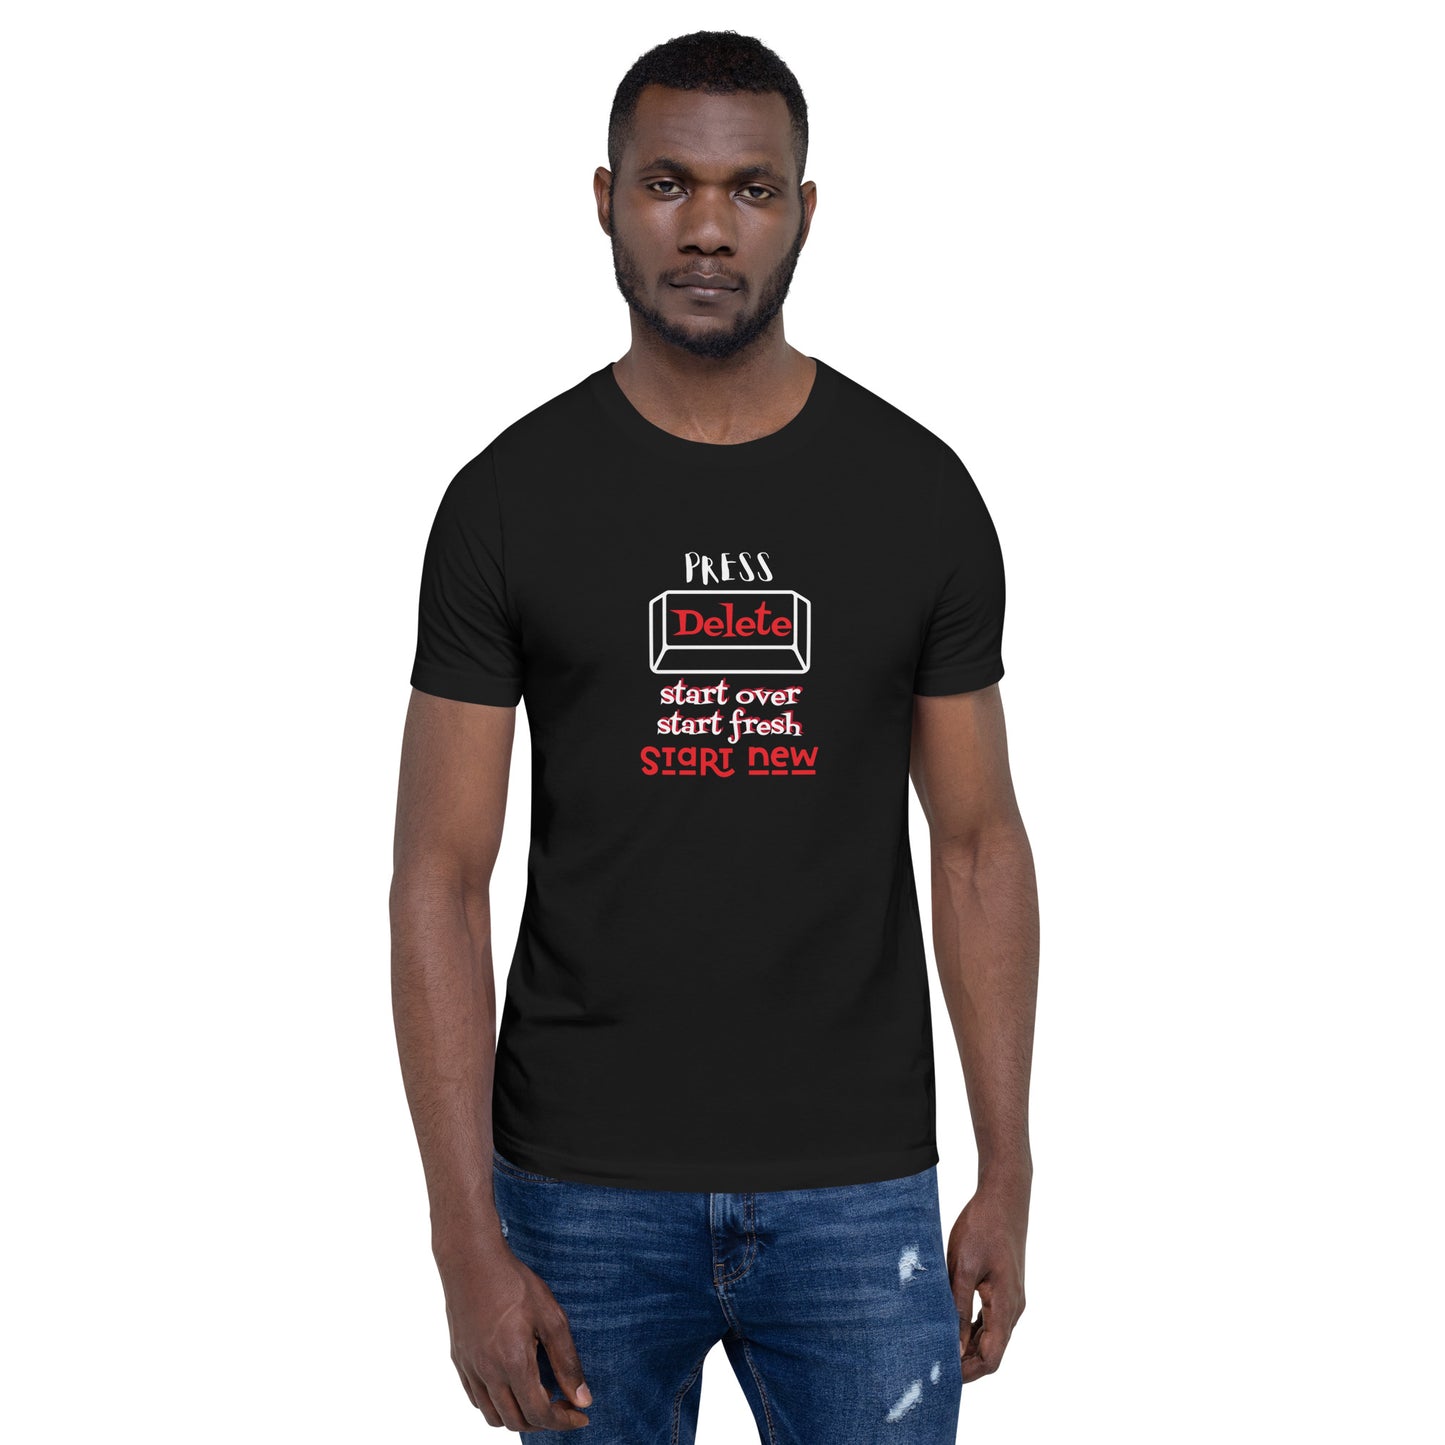 Press Delete Unisex T-Shirt - Nspirations Collection